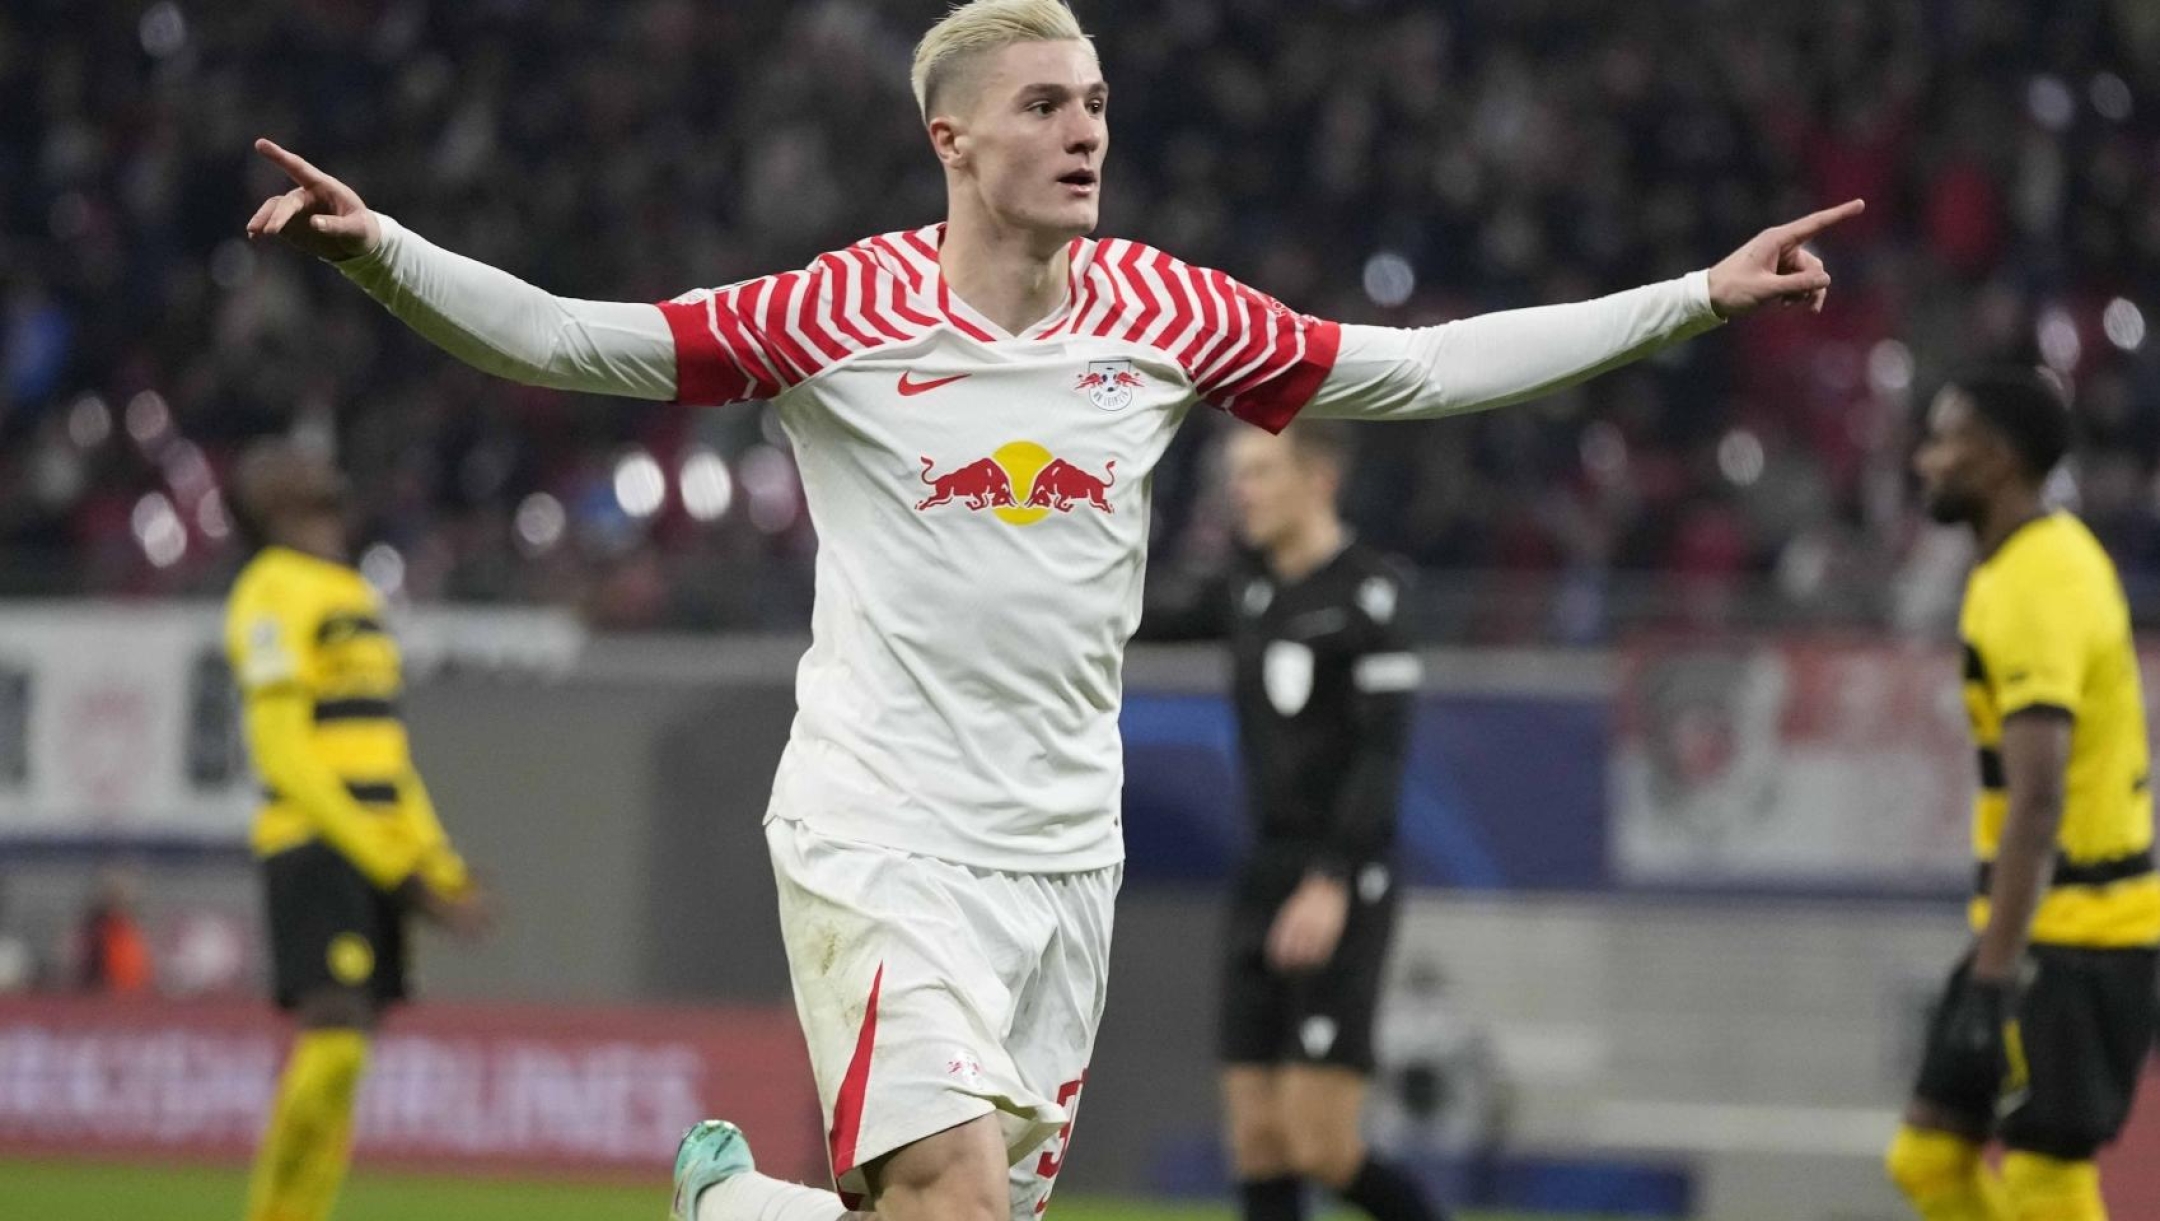 Leipzig's Benjamin Sesko celebrates after scoring his side's first goal during the group G Champions League soccer match between RB Leipzig and Young Boys Bern at the Red Bull arena stadium in Leipzig, Germany, Wednesday, Dec. 13, 2023. (AP Photo/Matthias Schrader)